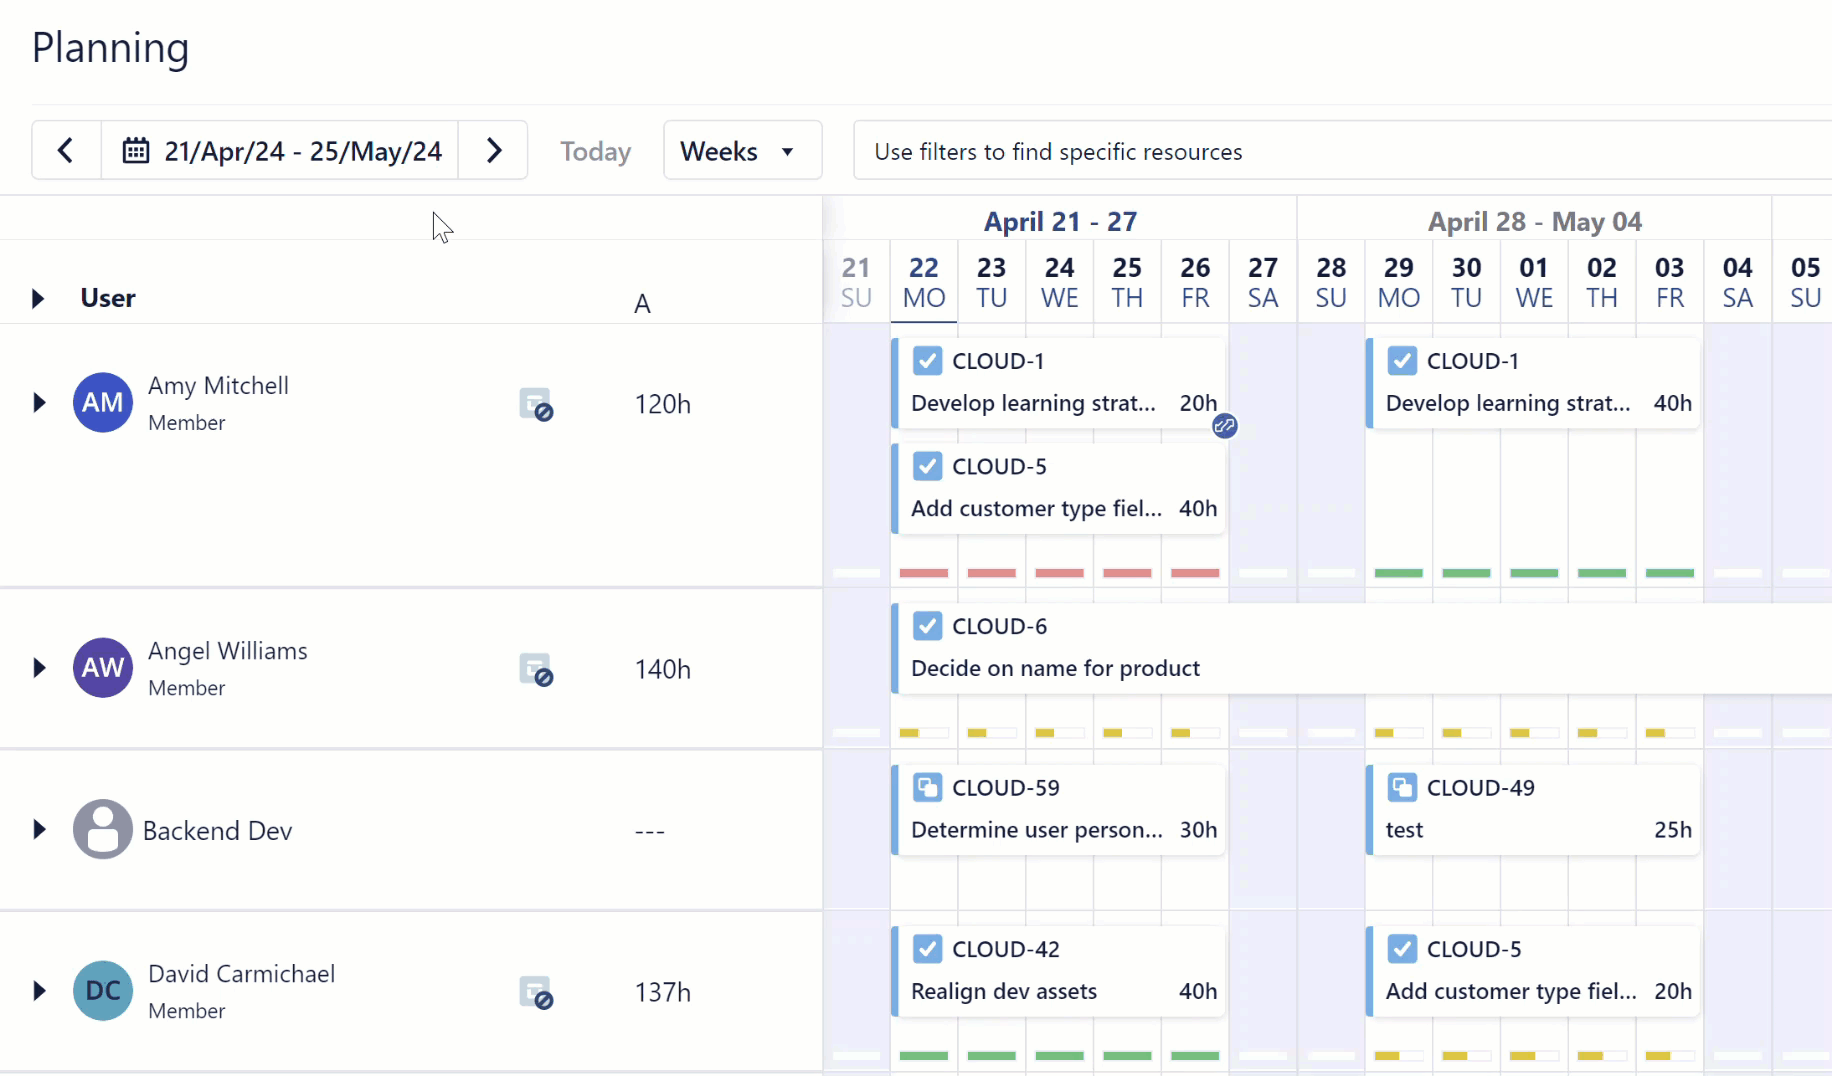 Setting the Planning Period to next month on the resource planning screen